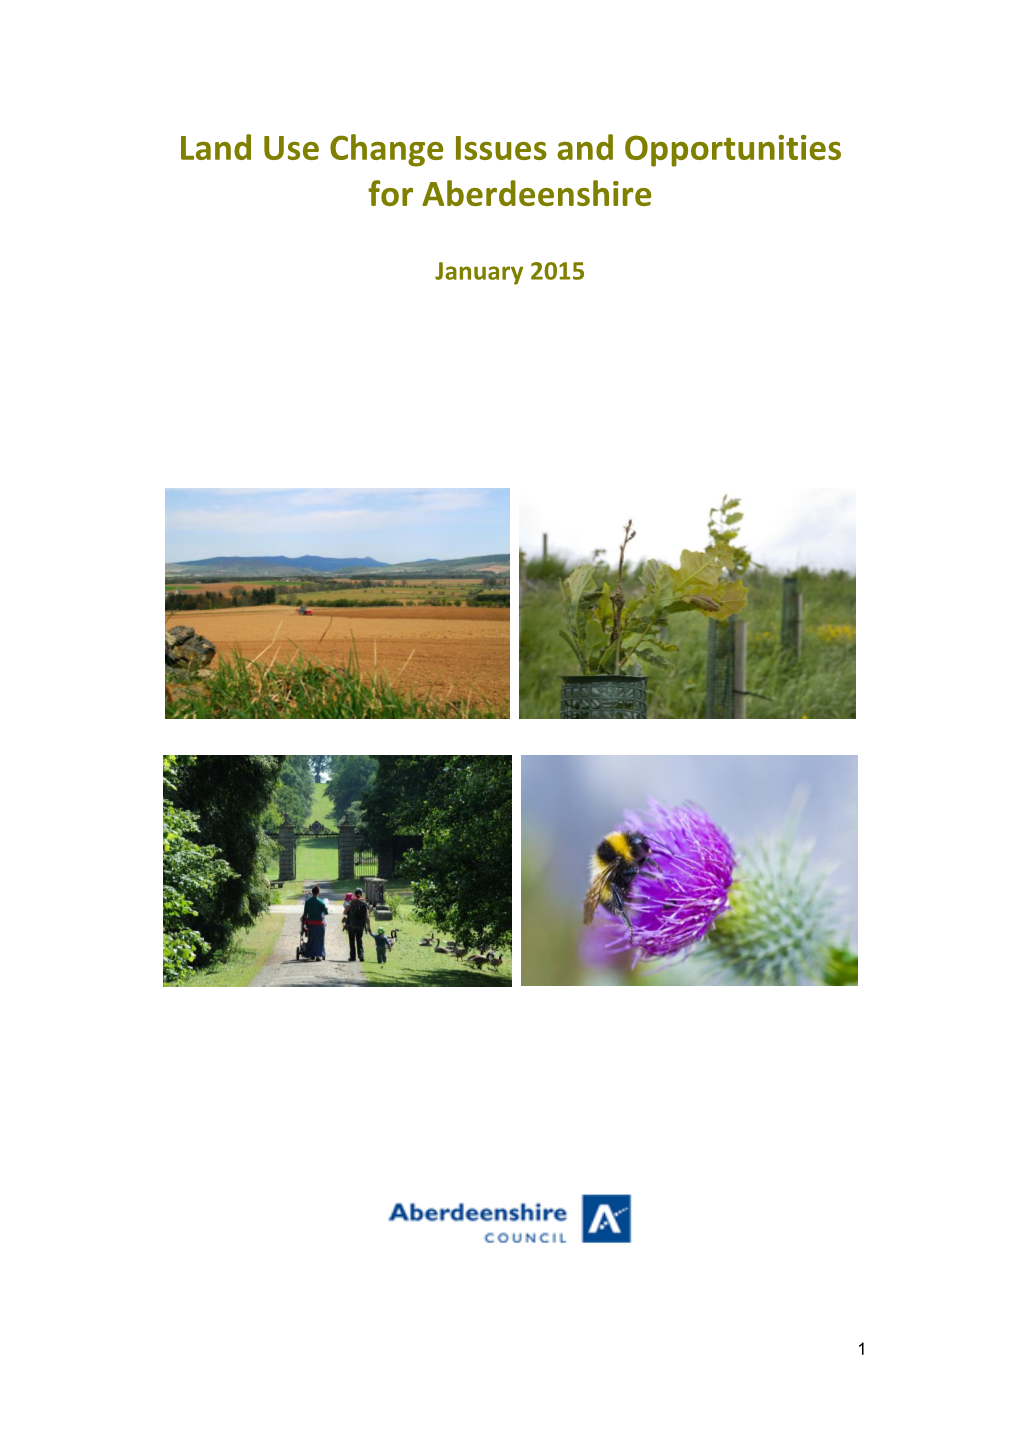 Land Use Change Issues and Opportunities for Aberdeenshire